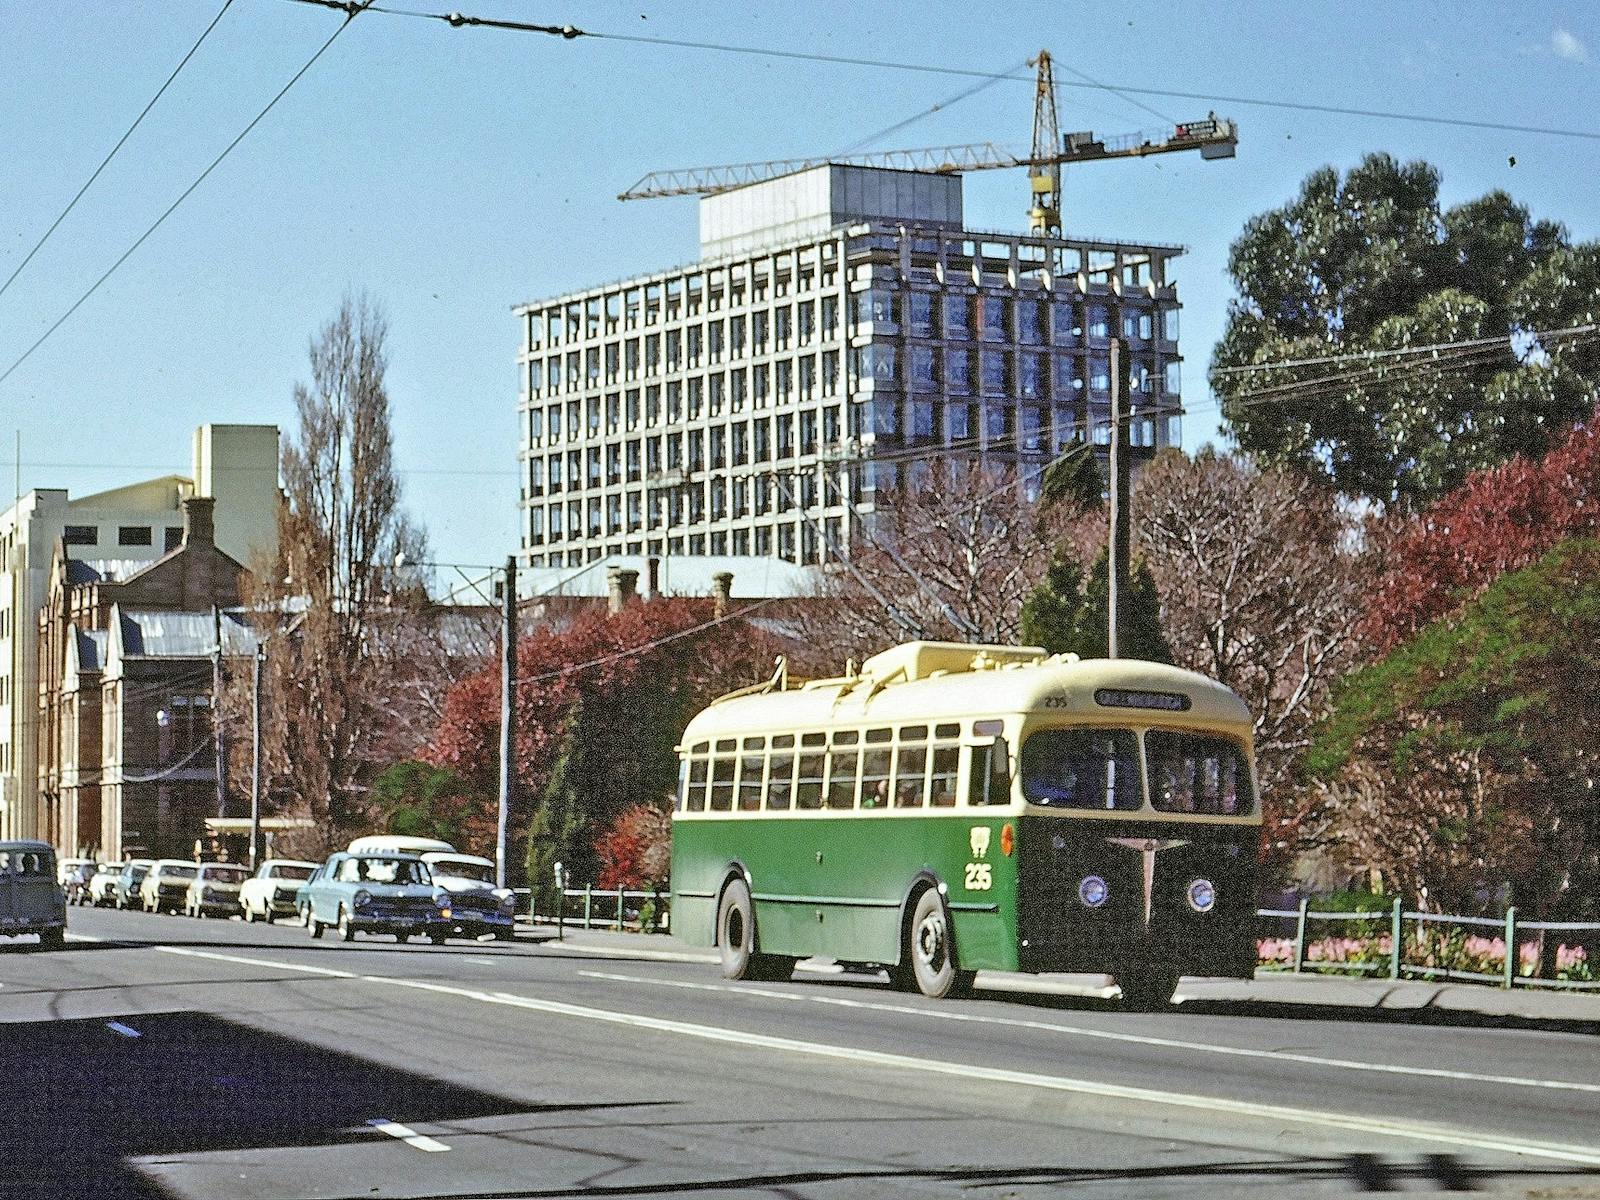 The Museum has two Trolley Buses.  No 235 was the last bus to operate under "the wires".